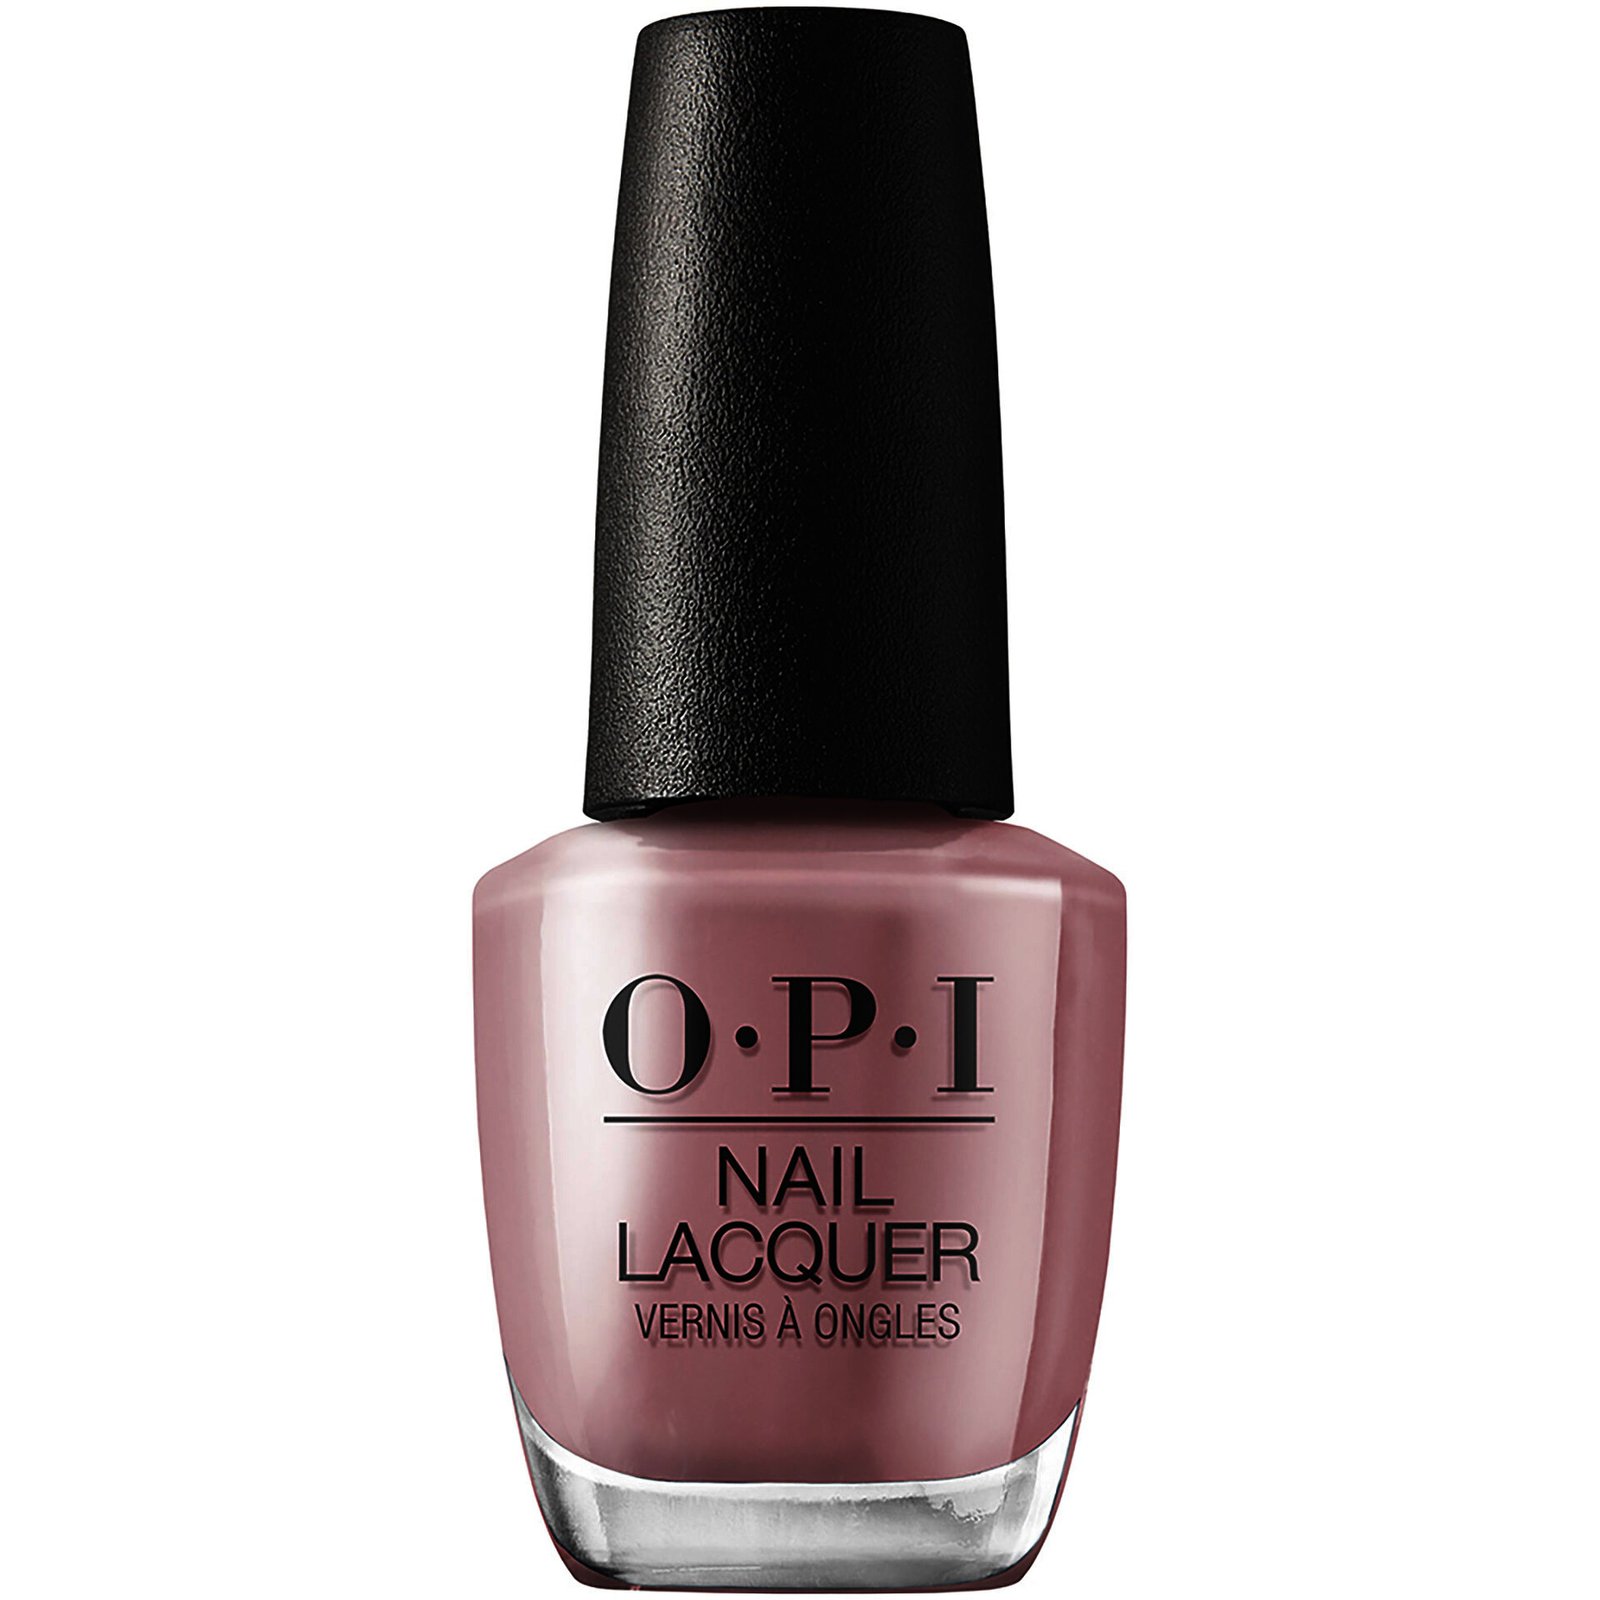 OPI Nail Lacquer Tickle My France-y 15 ml